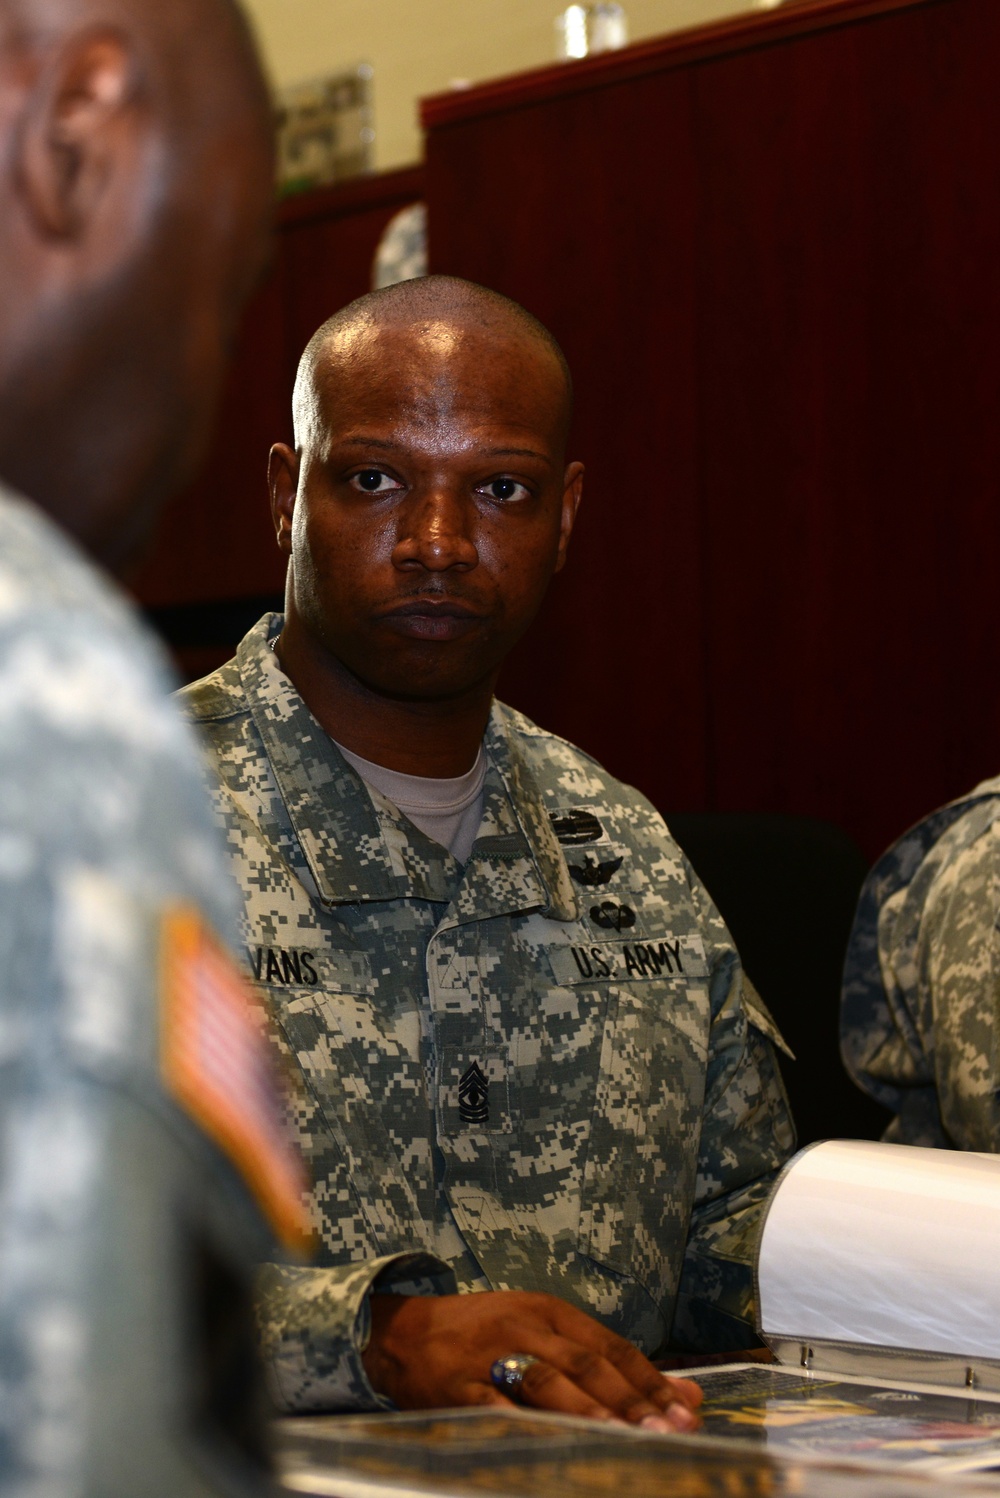 DVIDS News Fort Eustis 1st Sgts ‘Lead from the Top’ with new council